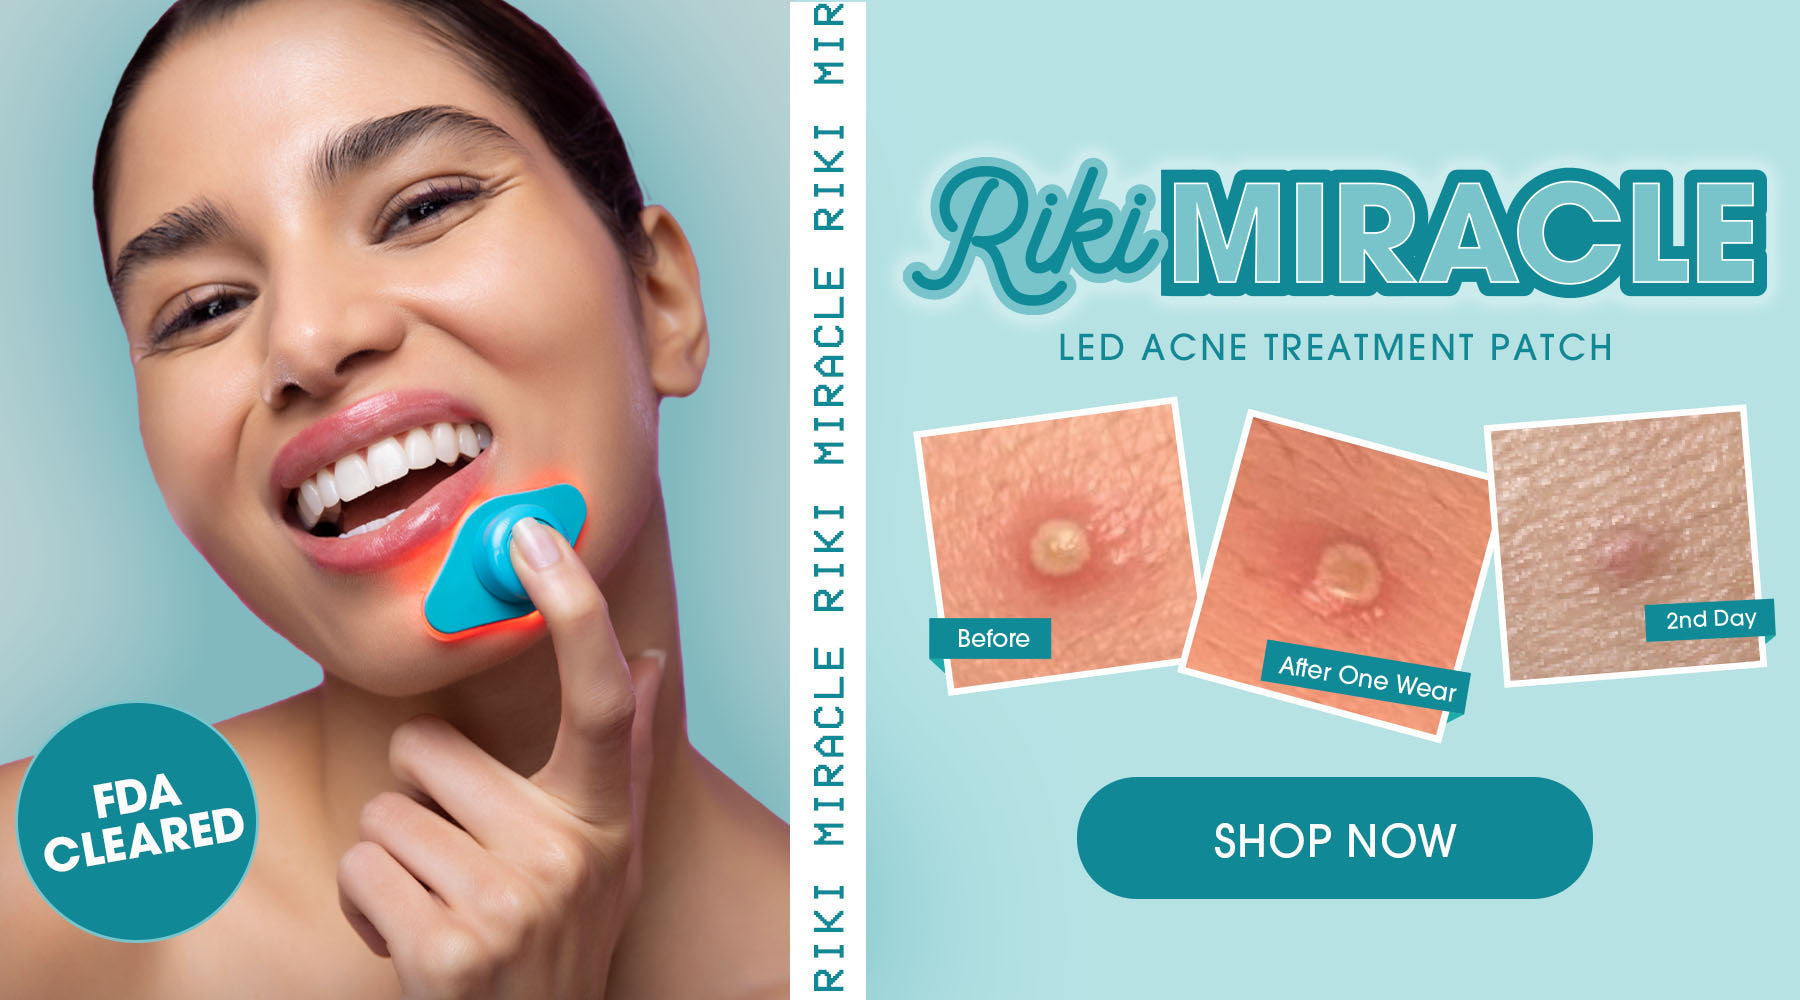 RIKI MIRACLE LED ACNE TREATMENT PATCH